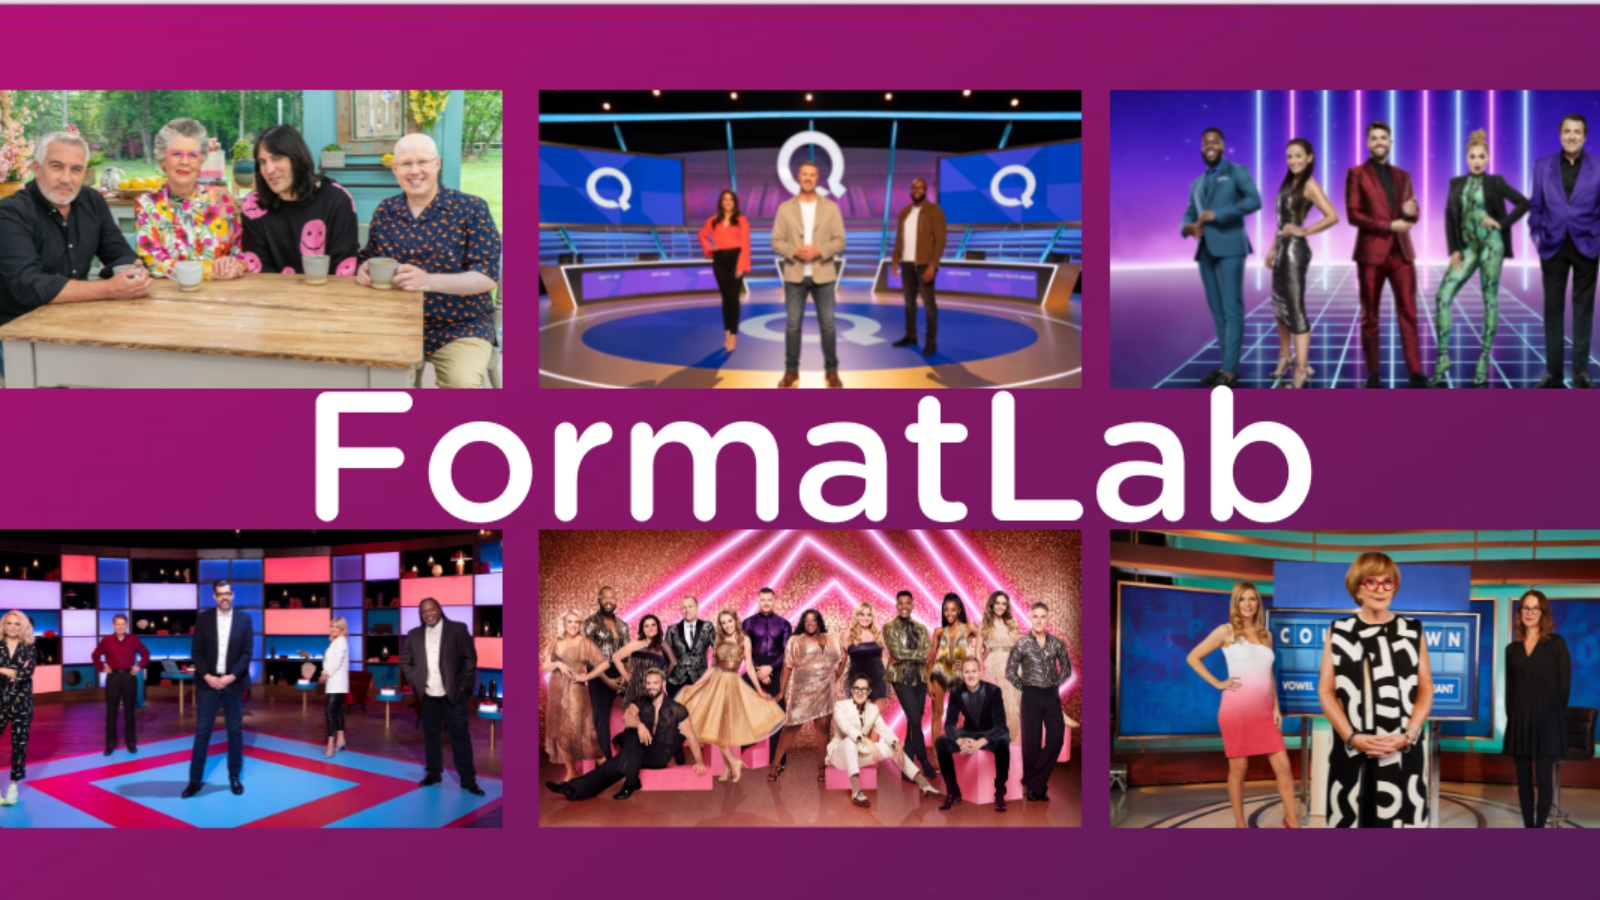 In the centre of the image are the words Format Lab, surrounded by six promotional images of television shows including The Great British Bake Off, Countdown, and Richard Osmond's House of Games.